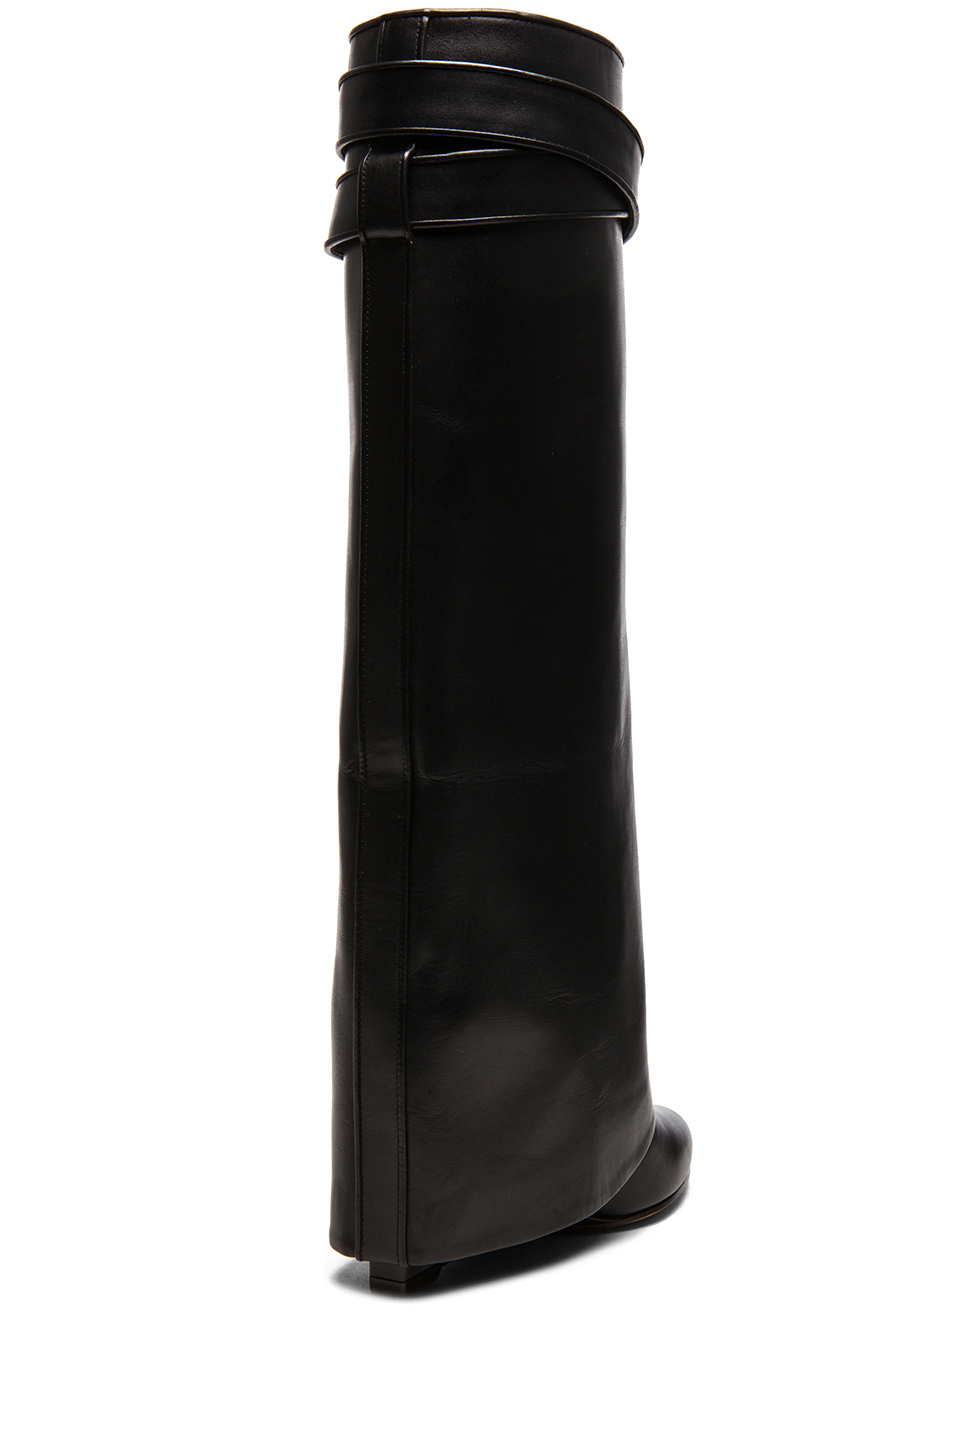 Lyst - Givenchy Shark Lock Tall Leather Pant Boots in Black